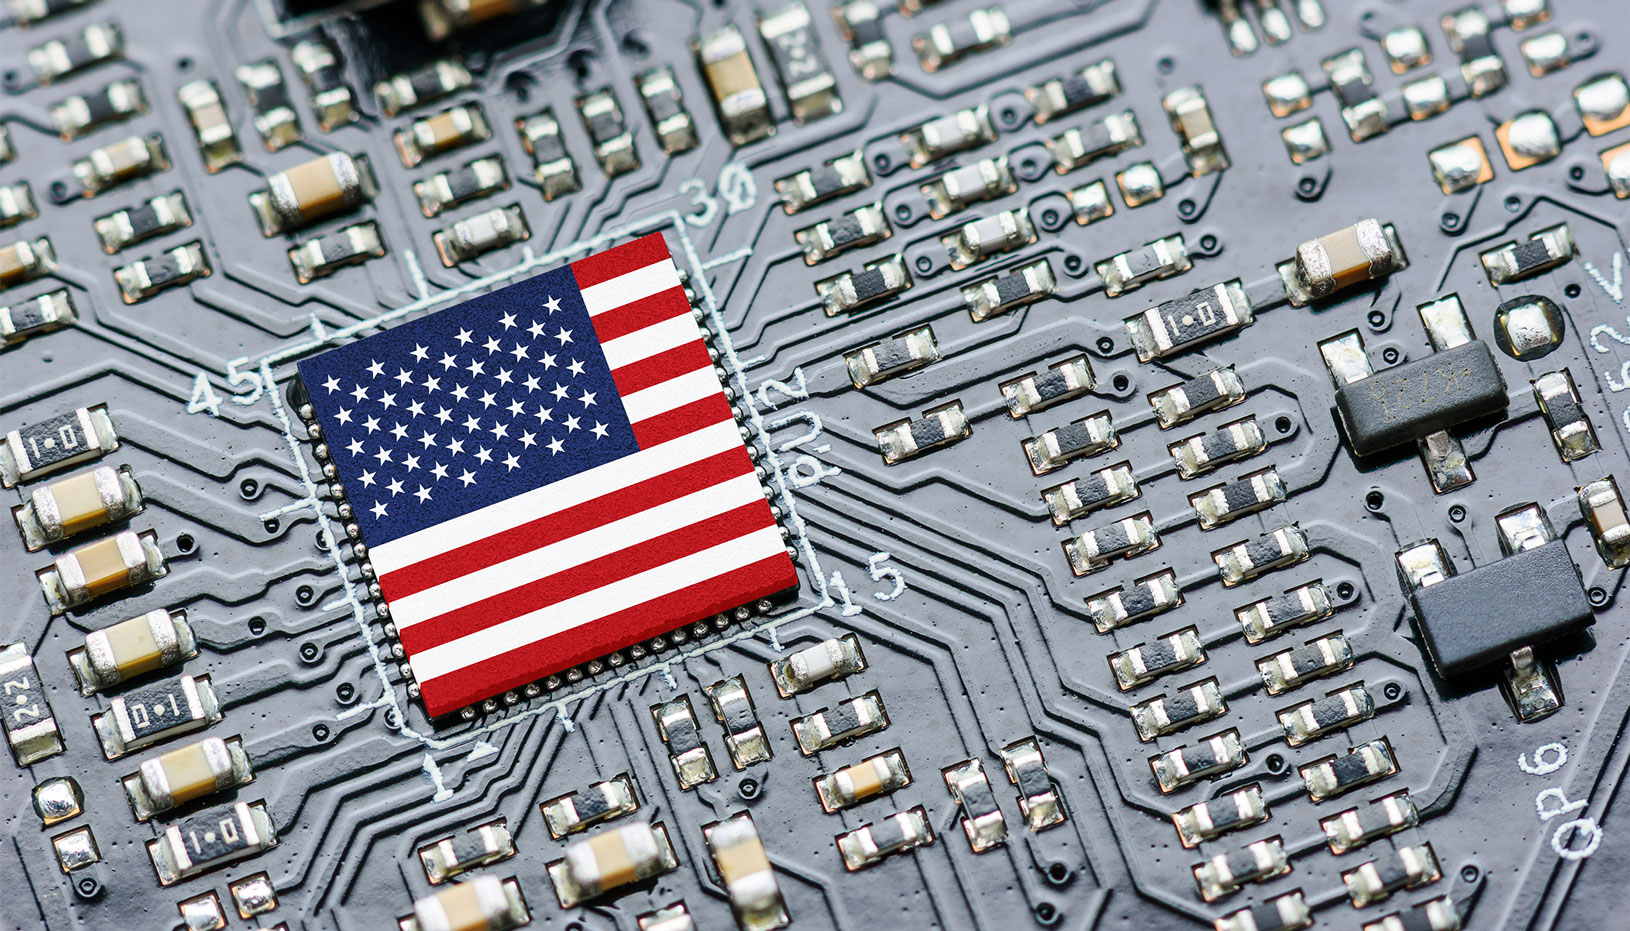 American flag microchip surrounded by a circuit-board